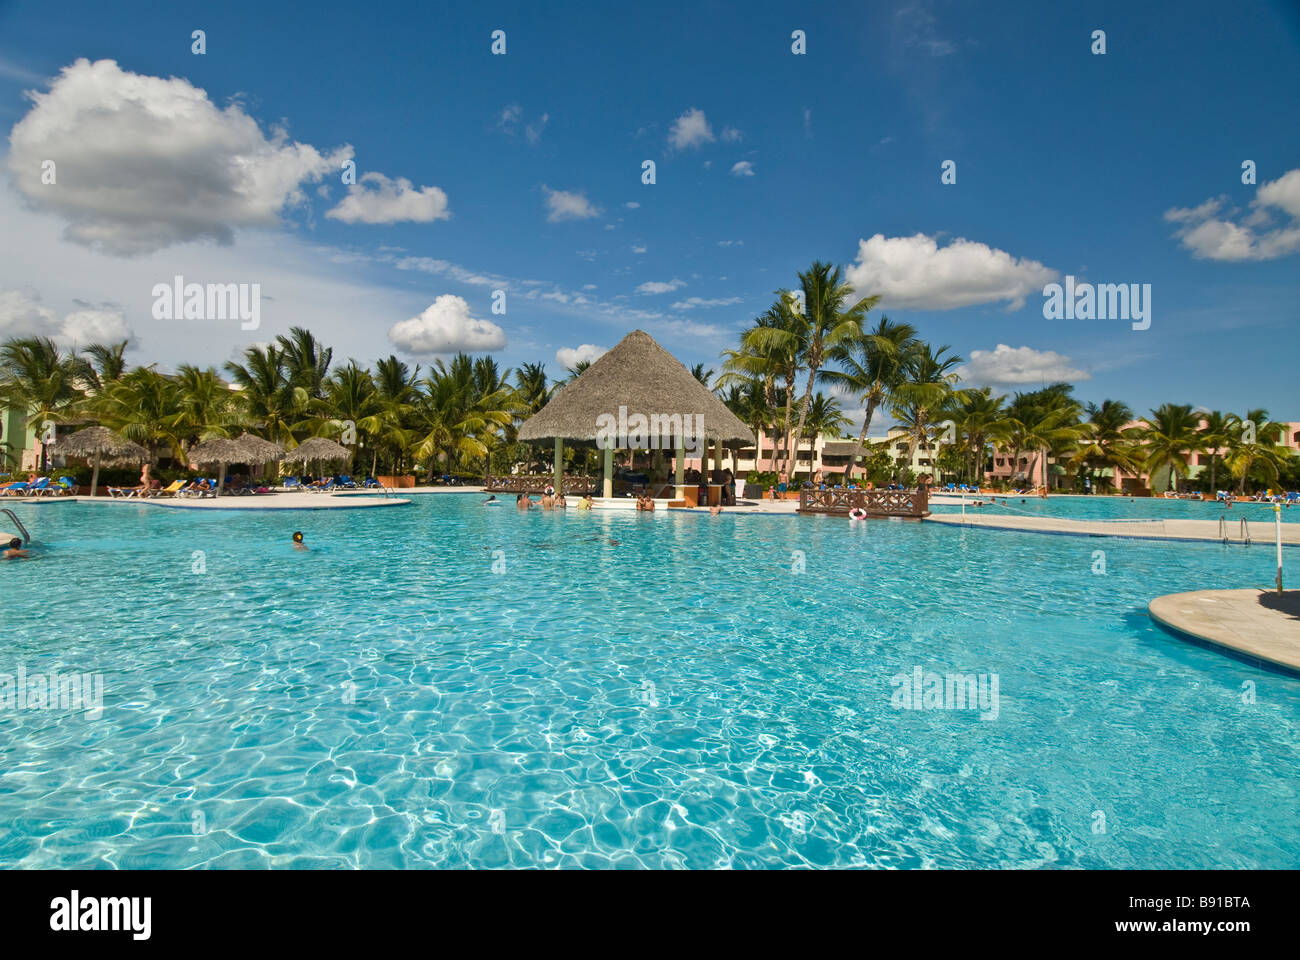 Hotel swimming pool thatch pool bar Bayahibe Dominican Republic Viva Wyndham Dominicus Palace all-inclusive resort palm trees Stock Photo